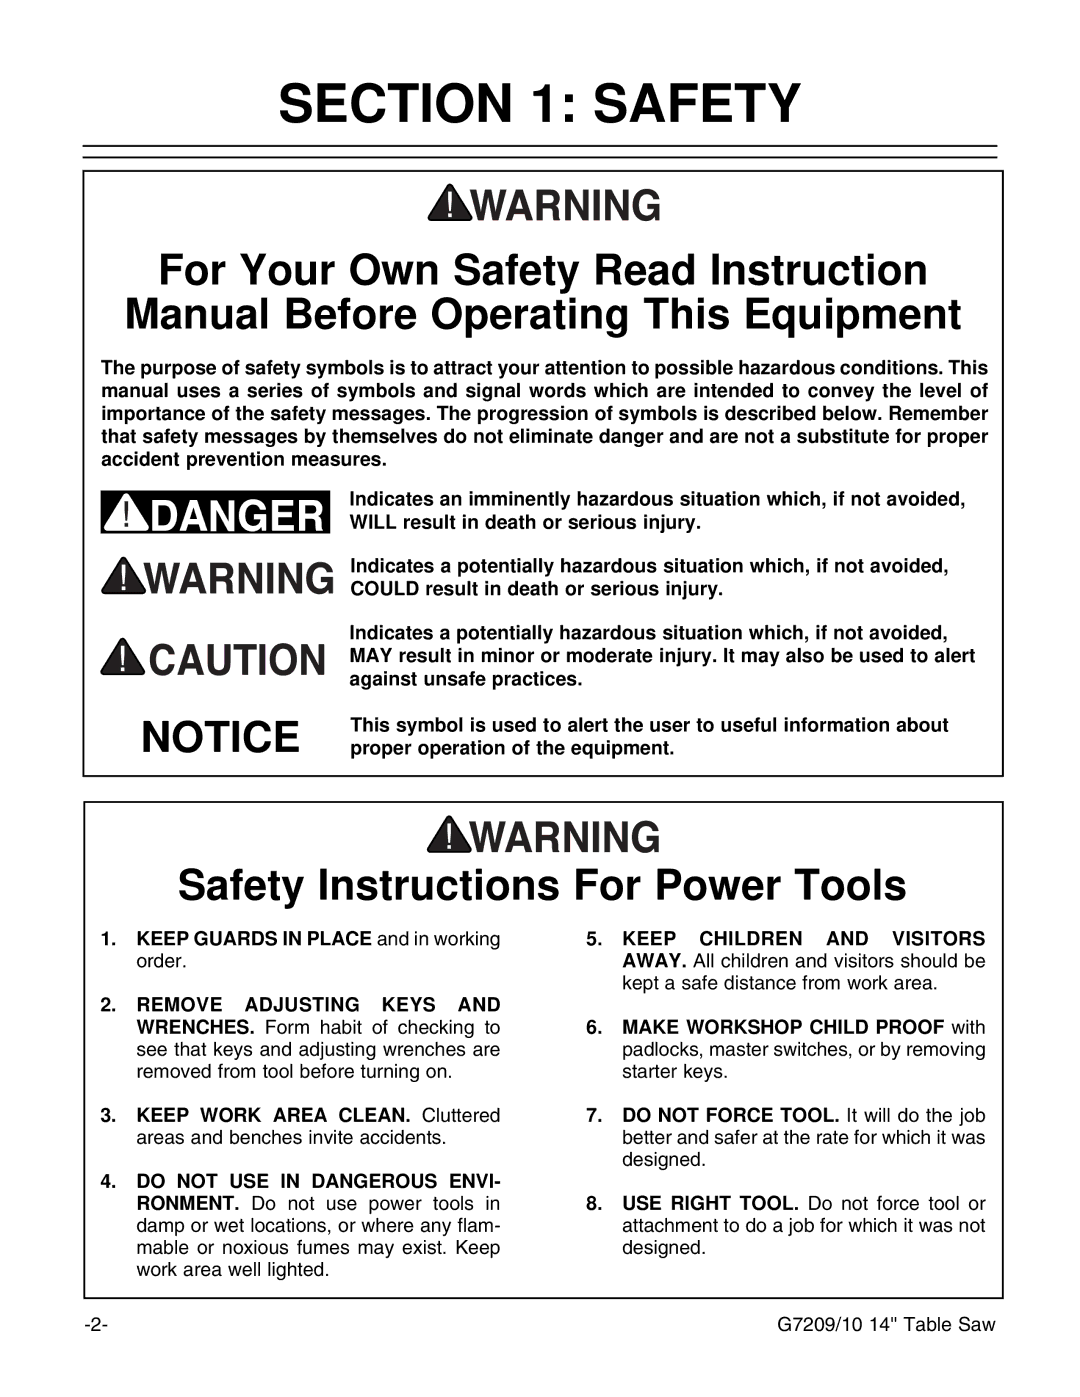 Grizzly G7209 instruction manual Safety Instructions For Power Tools 